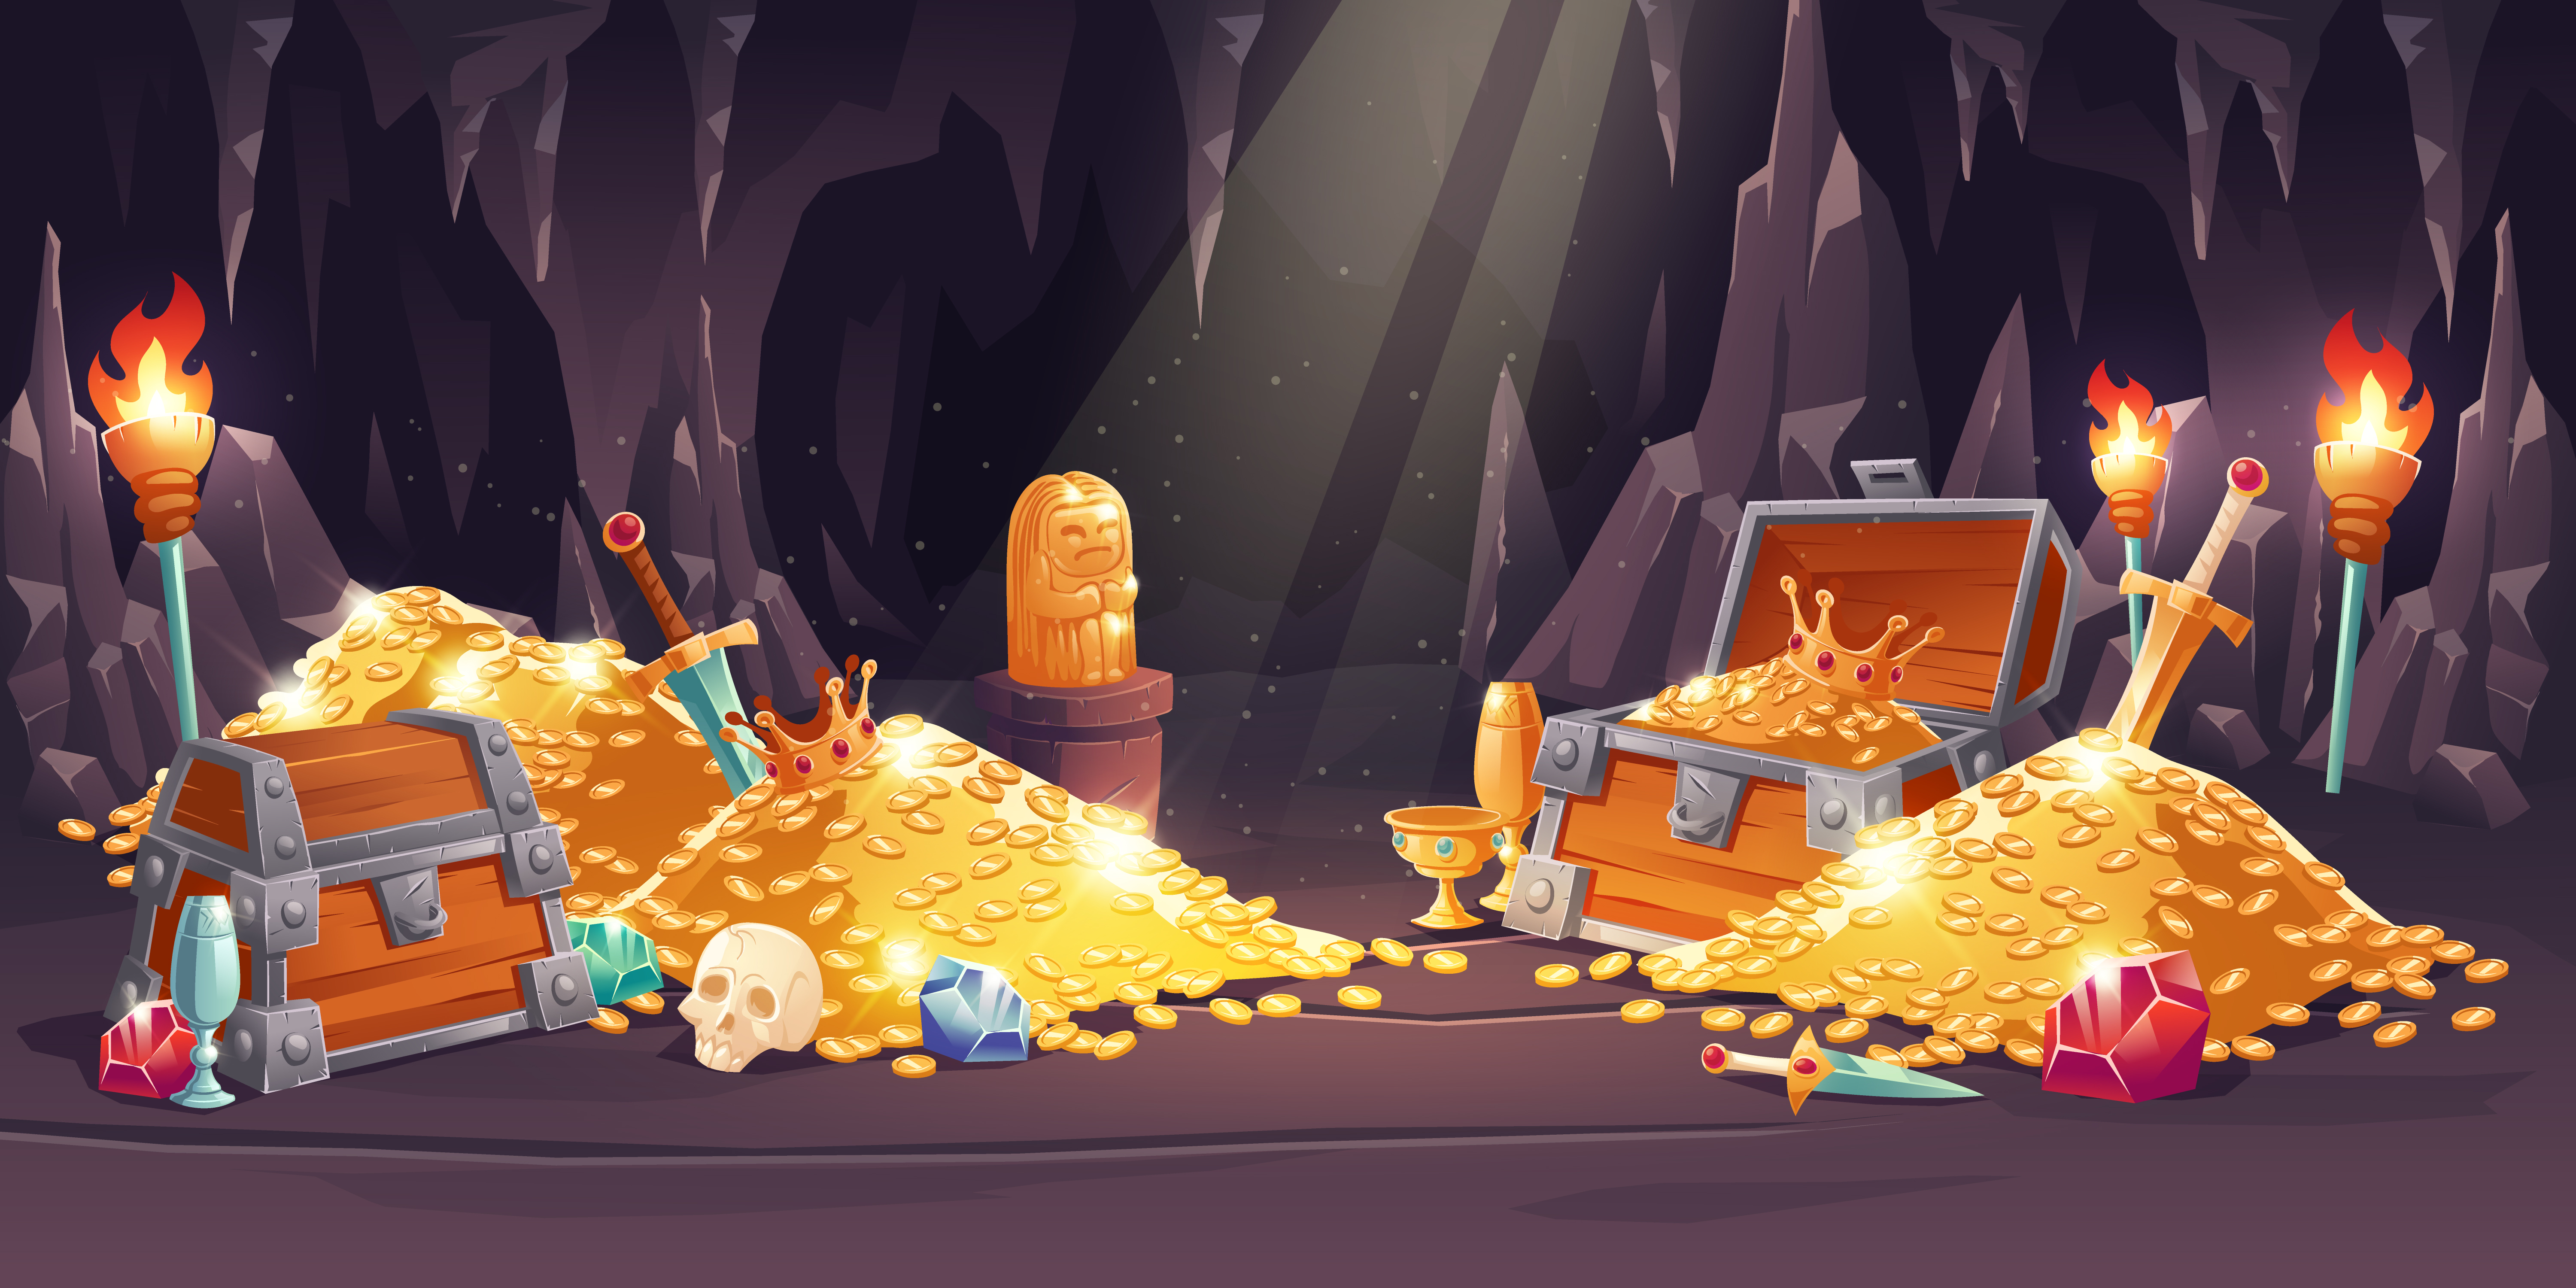 Cavern with treasure of gold coins, chests, gems, and other valuable items